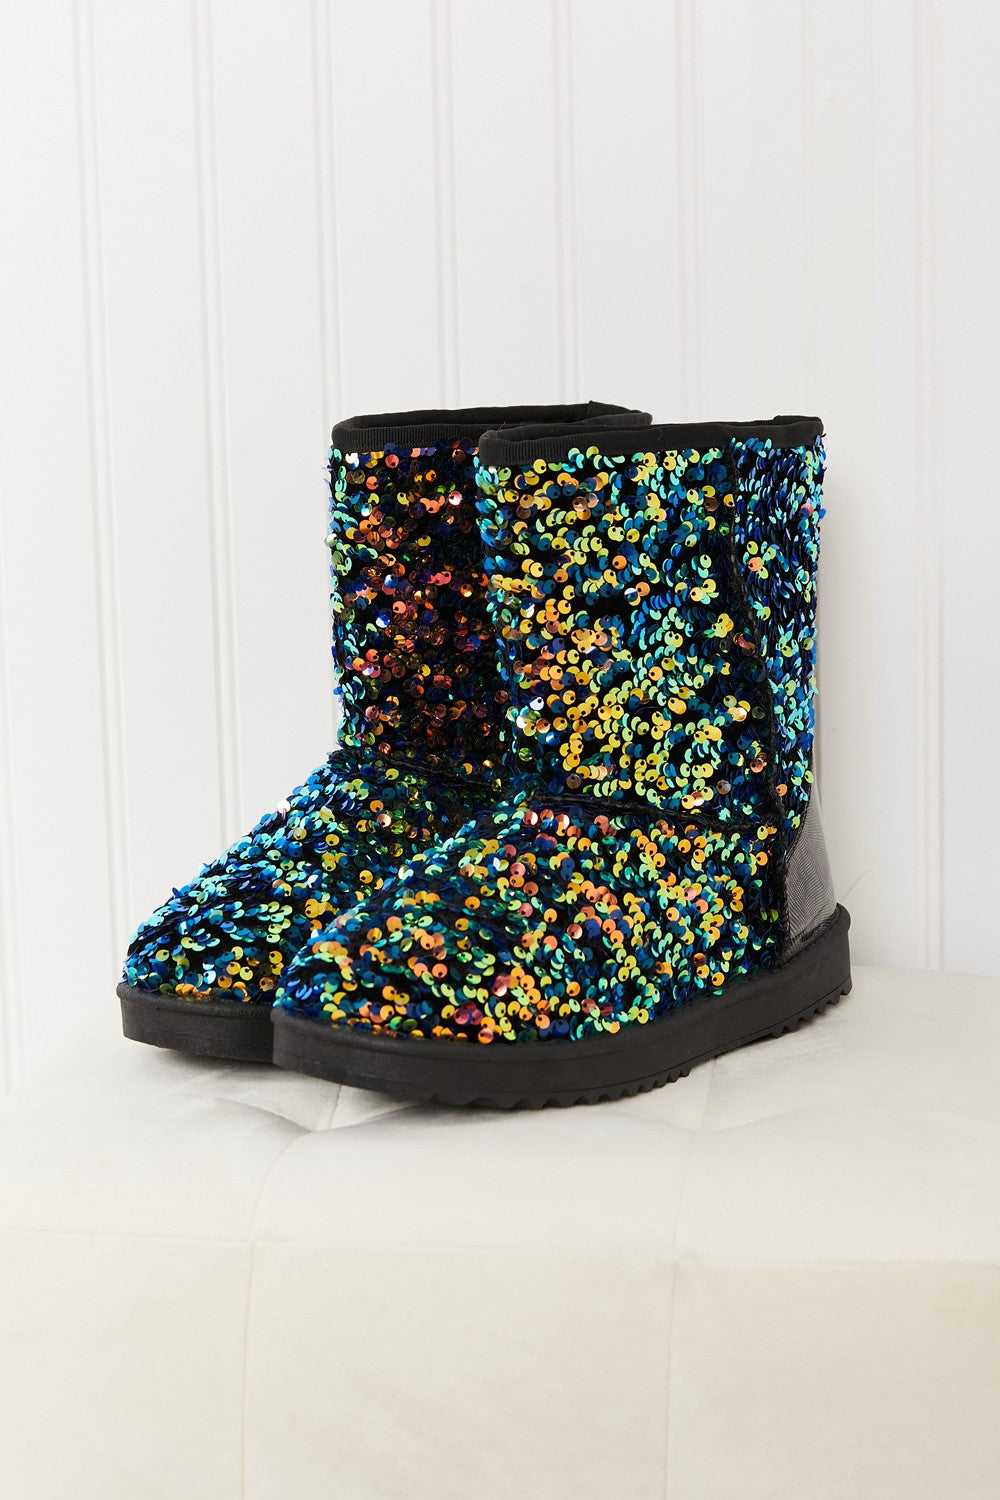 Forever Link Dazzle Me Multicolor Sequin Snow Booties - Sew Lit Creations Brand Ltd.